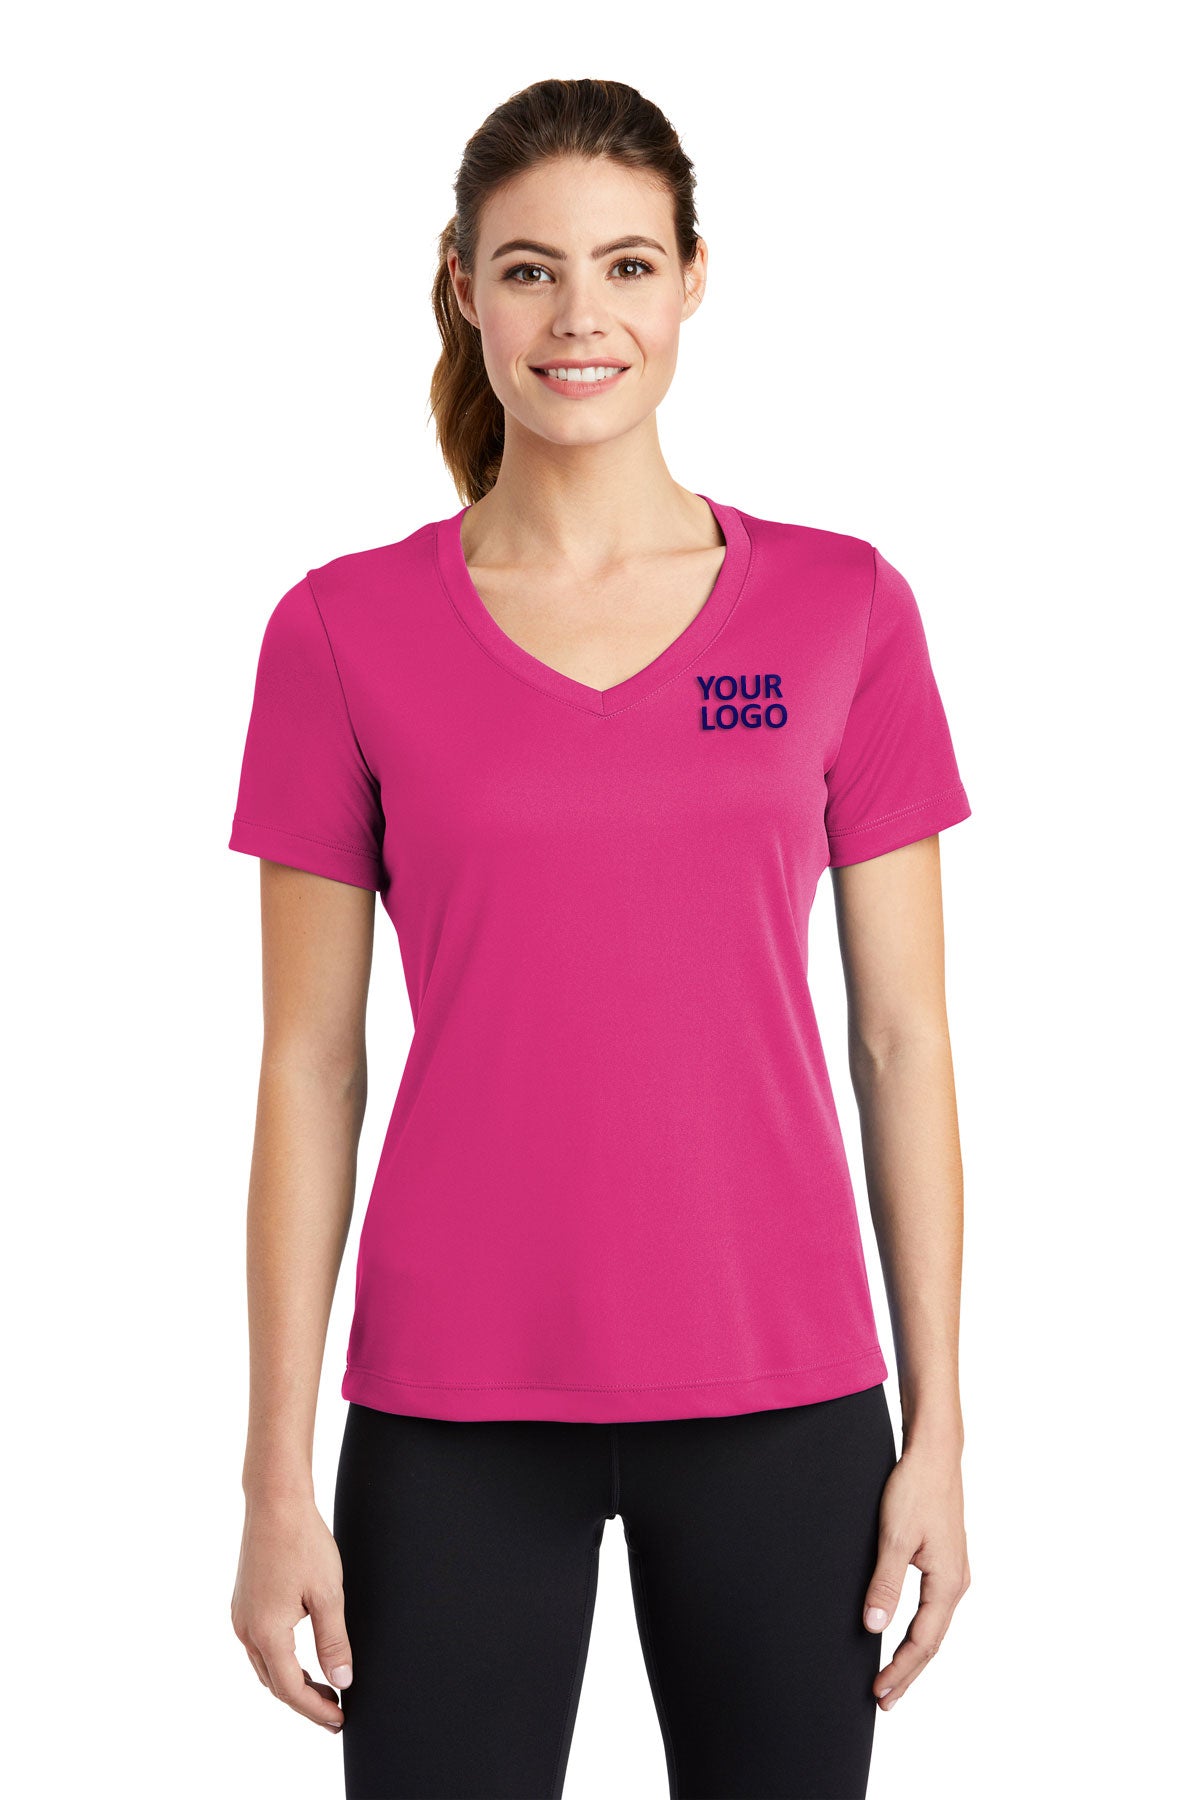 Sport-Tek Ladies PosiCharge Competitor Customized V-Neck Tee's, Pink Raspberry